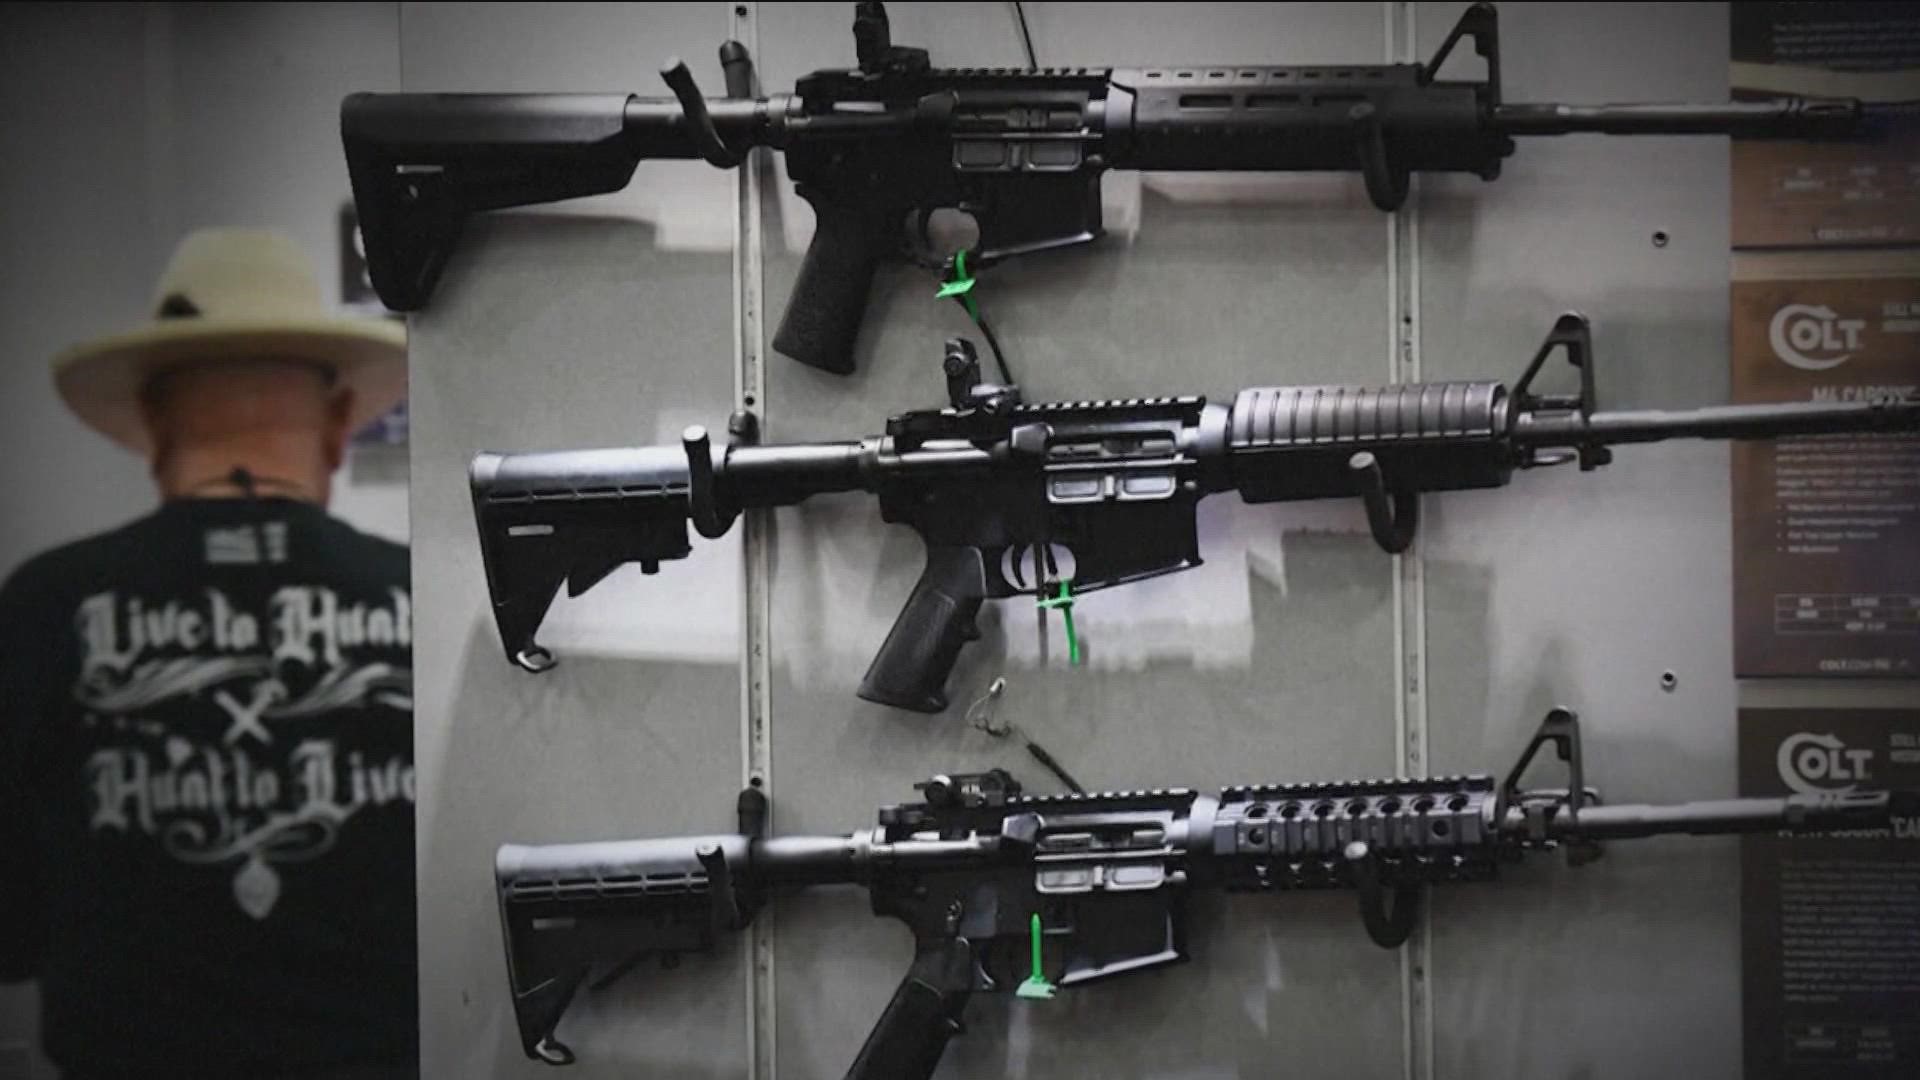 The Austin City Council is trying to find ways to keep dangerous weapons off the streets.